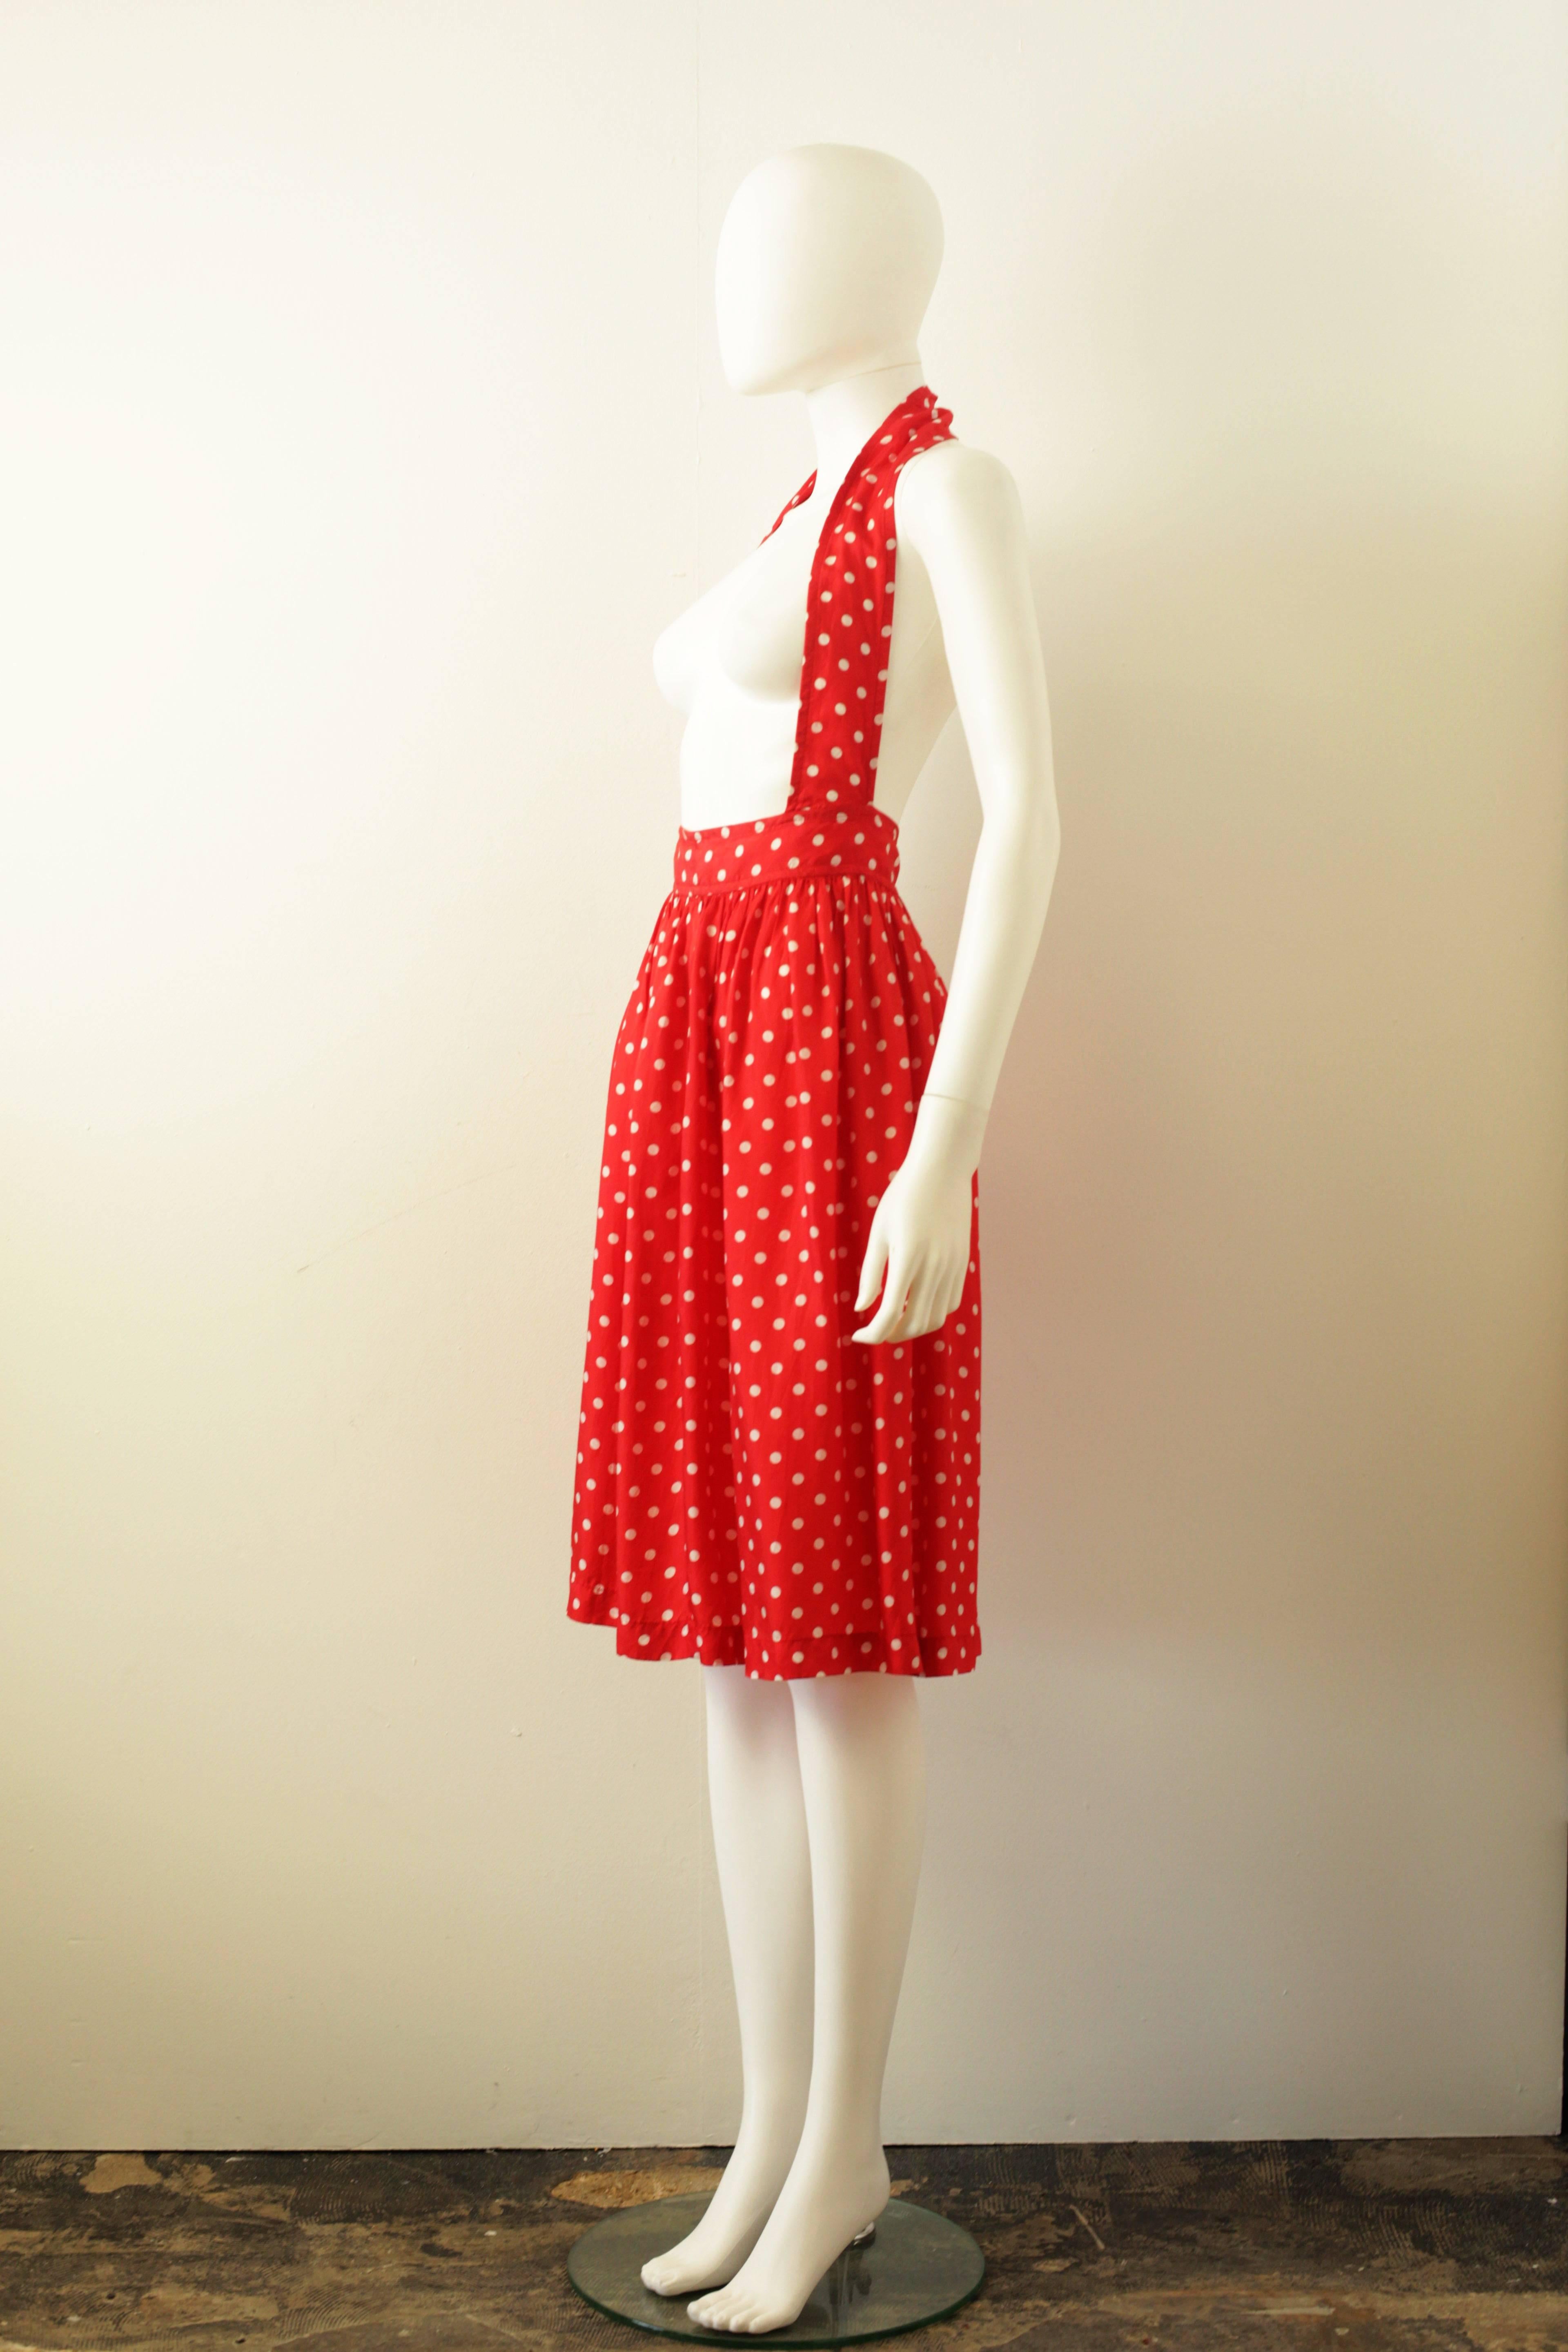 This is a beautiful red and white polka dot silky skirt with diagonal shoulder harness from Comme des Garcons. The skirt shape is a classic from CDG, oversize waist, shoulder brace and softly ruched at the waist to create soft folds in the